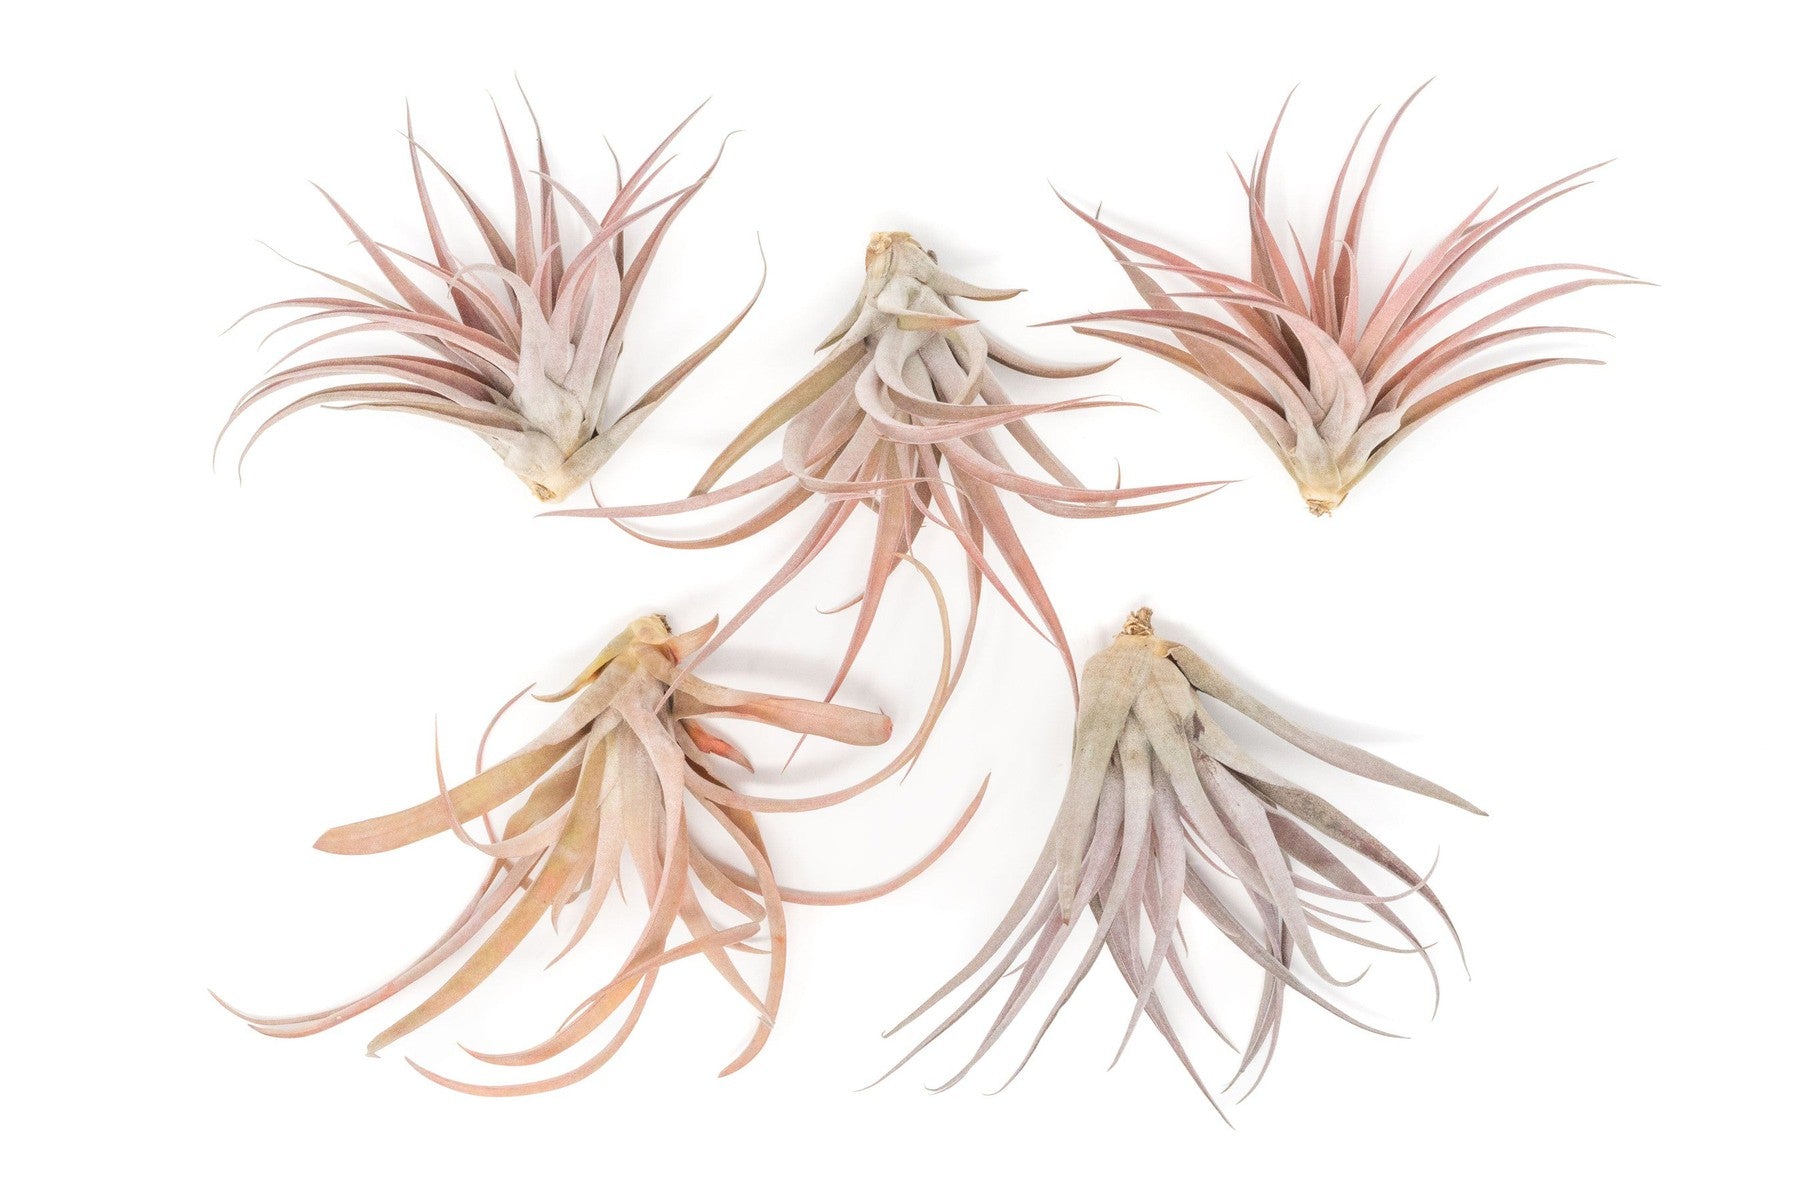 SALE - Large Tillandsia Capitata Peach - Set of 5, 10, or 20 Air Plants - 50% Off-airplant-The Succulent Source